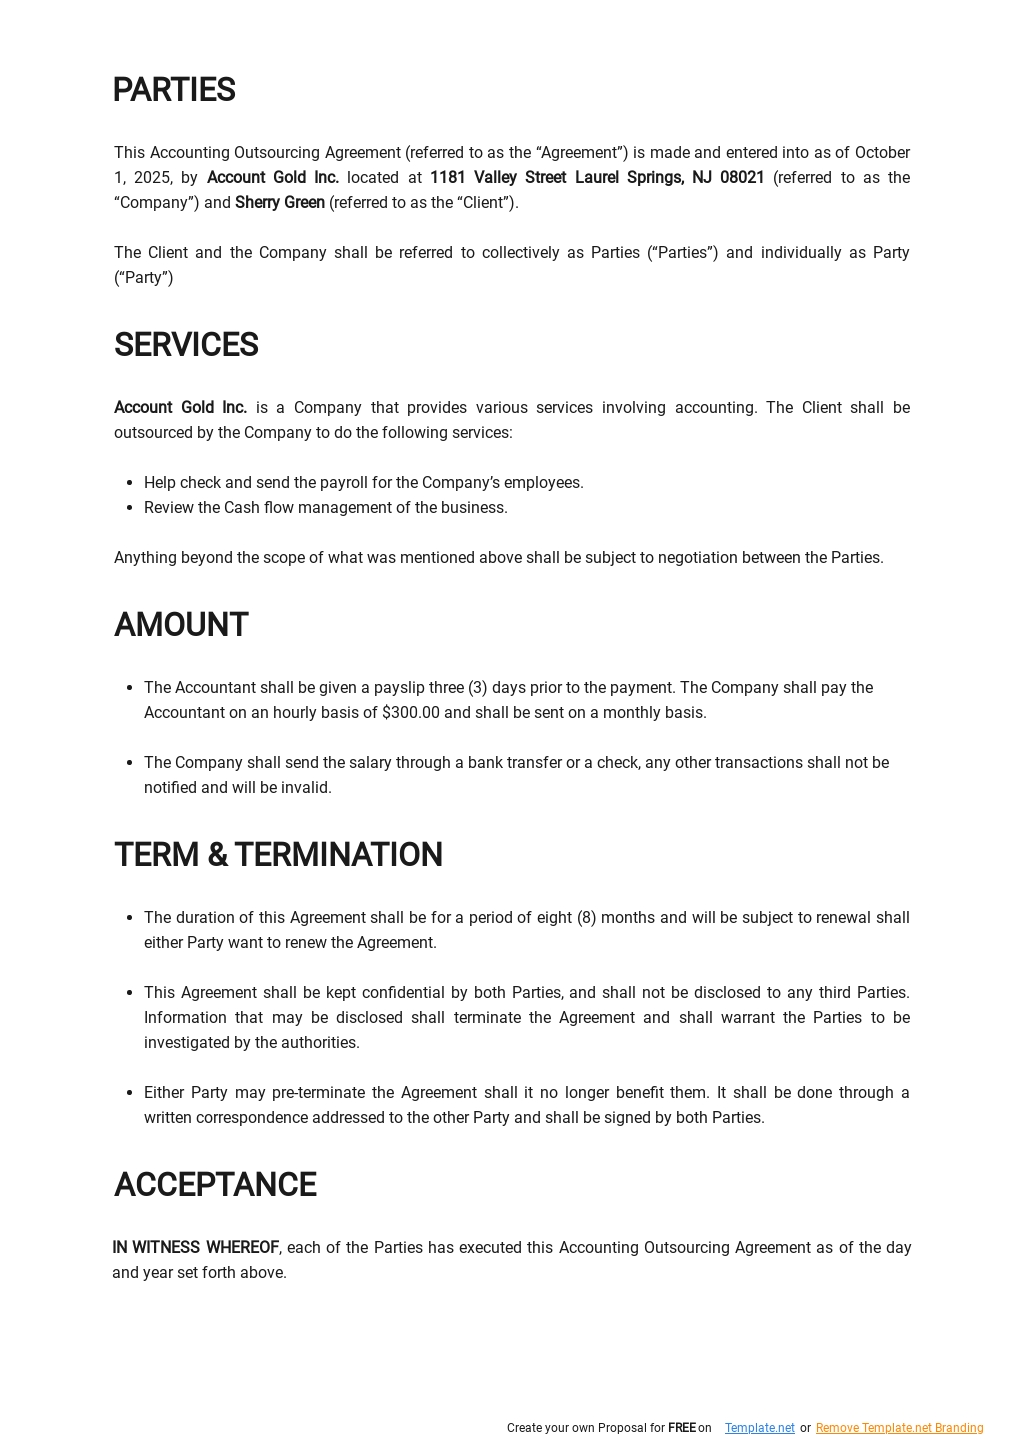 Accounting Outsourcing Agreement Template 1.jpe